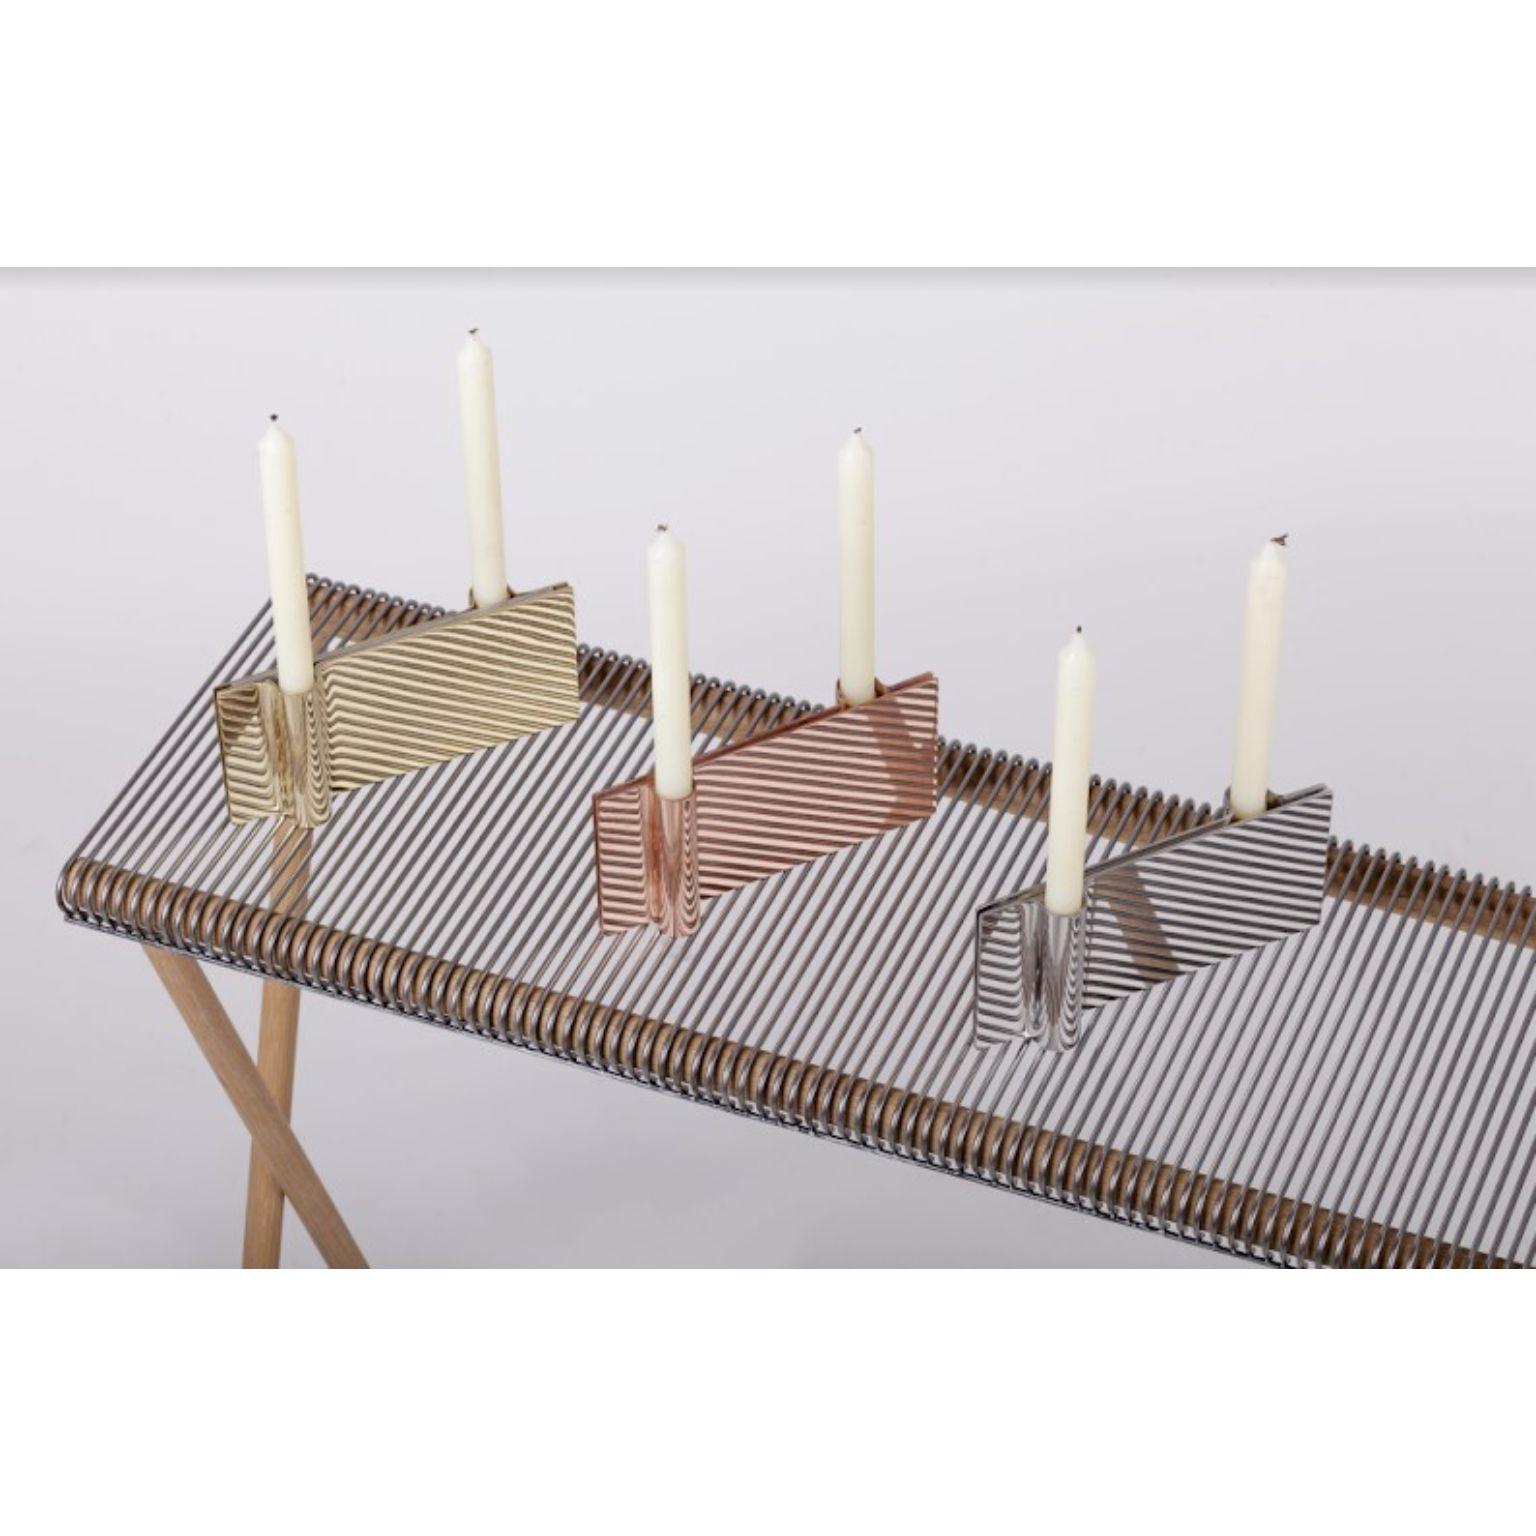 Copper Set of 3 Folio Candle Holders by Mingardo